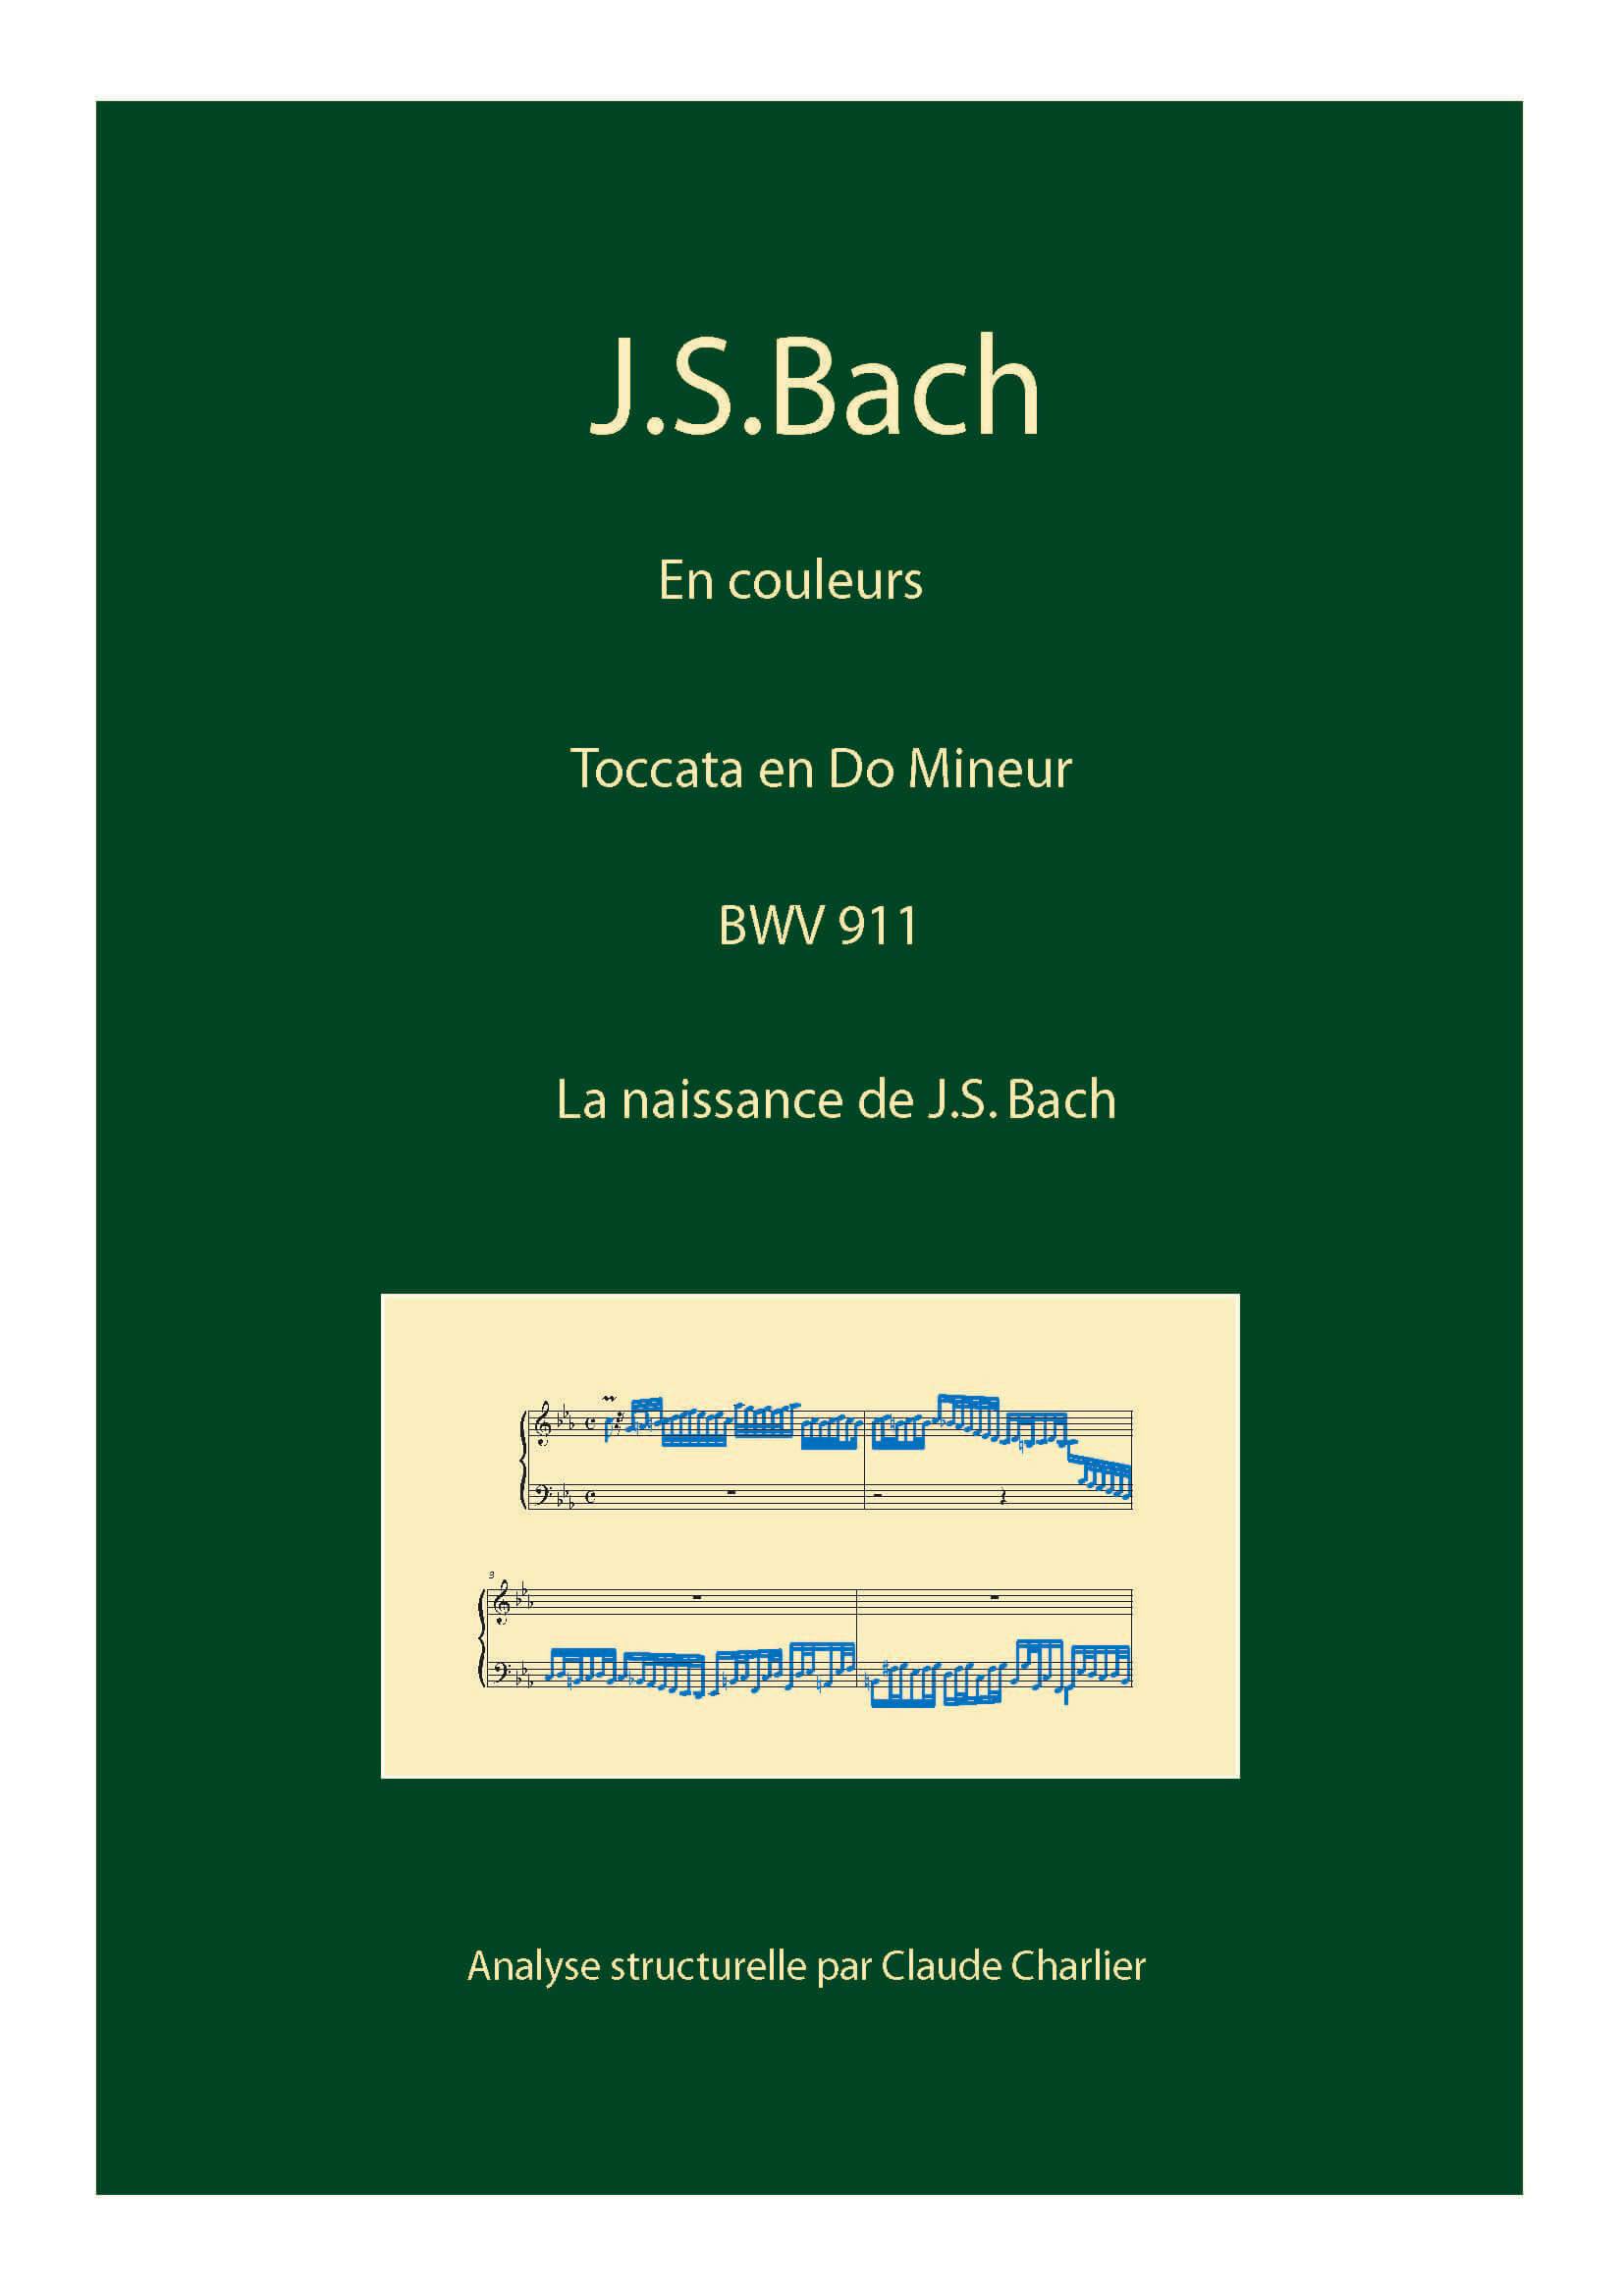 Toccata BWV 911 - Analyse Musicale - CHARLIER C. - page de garde